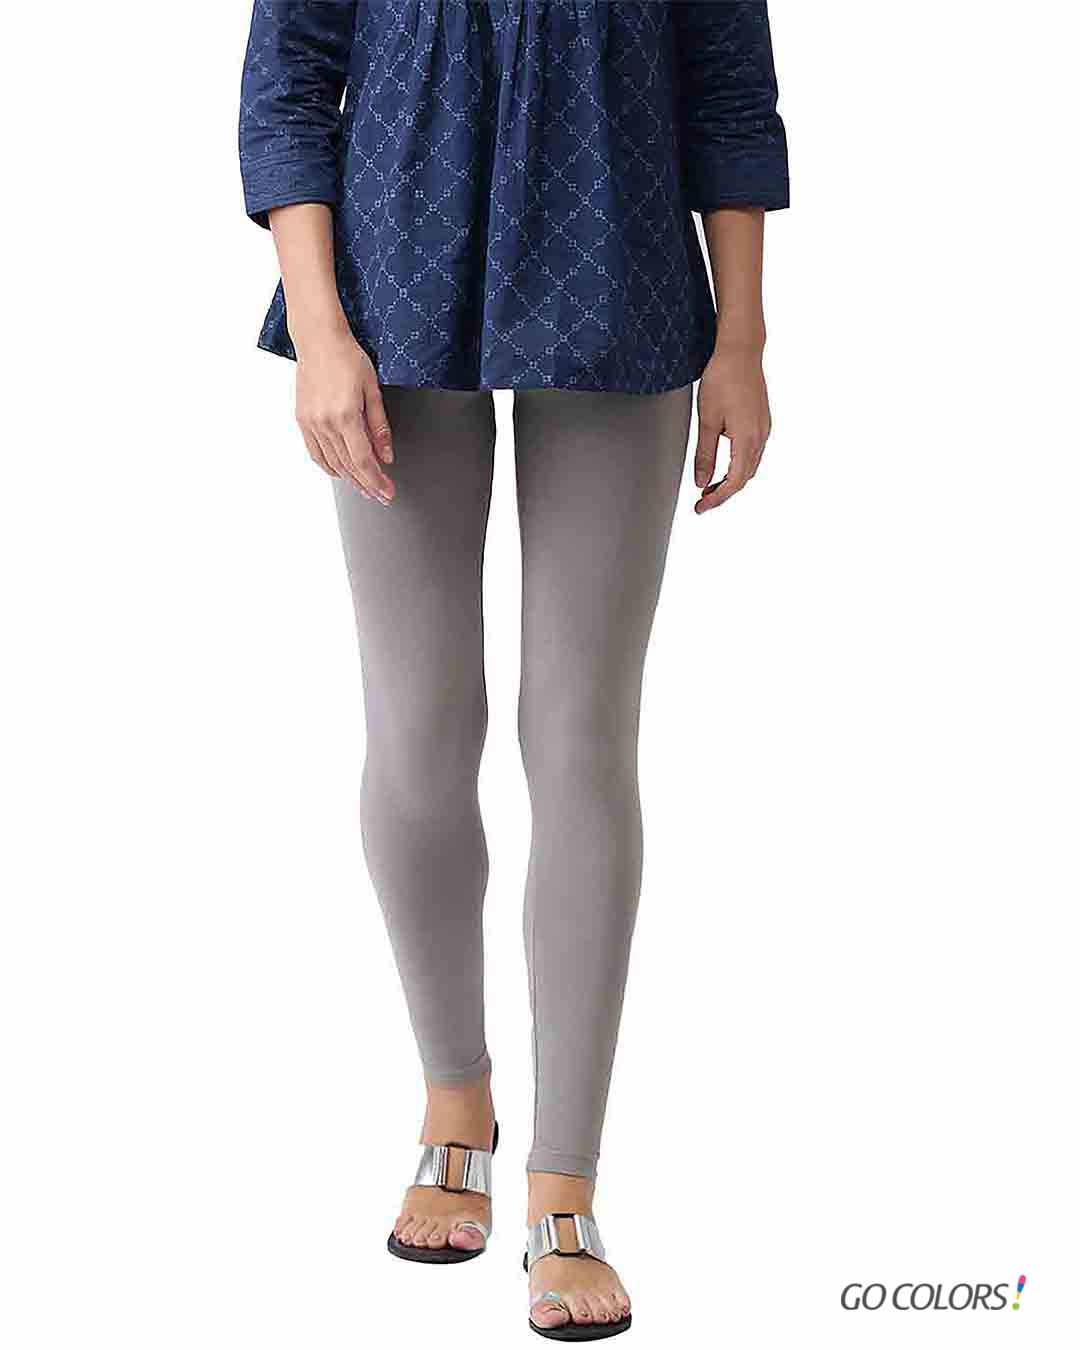 Buy Go Colors Young Royal Ankle Length Legging Online at Bewakoof